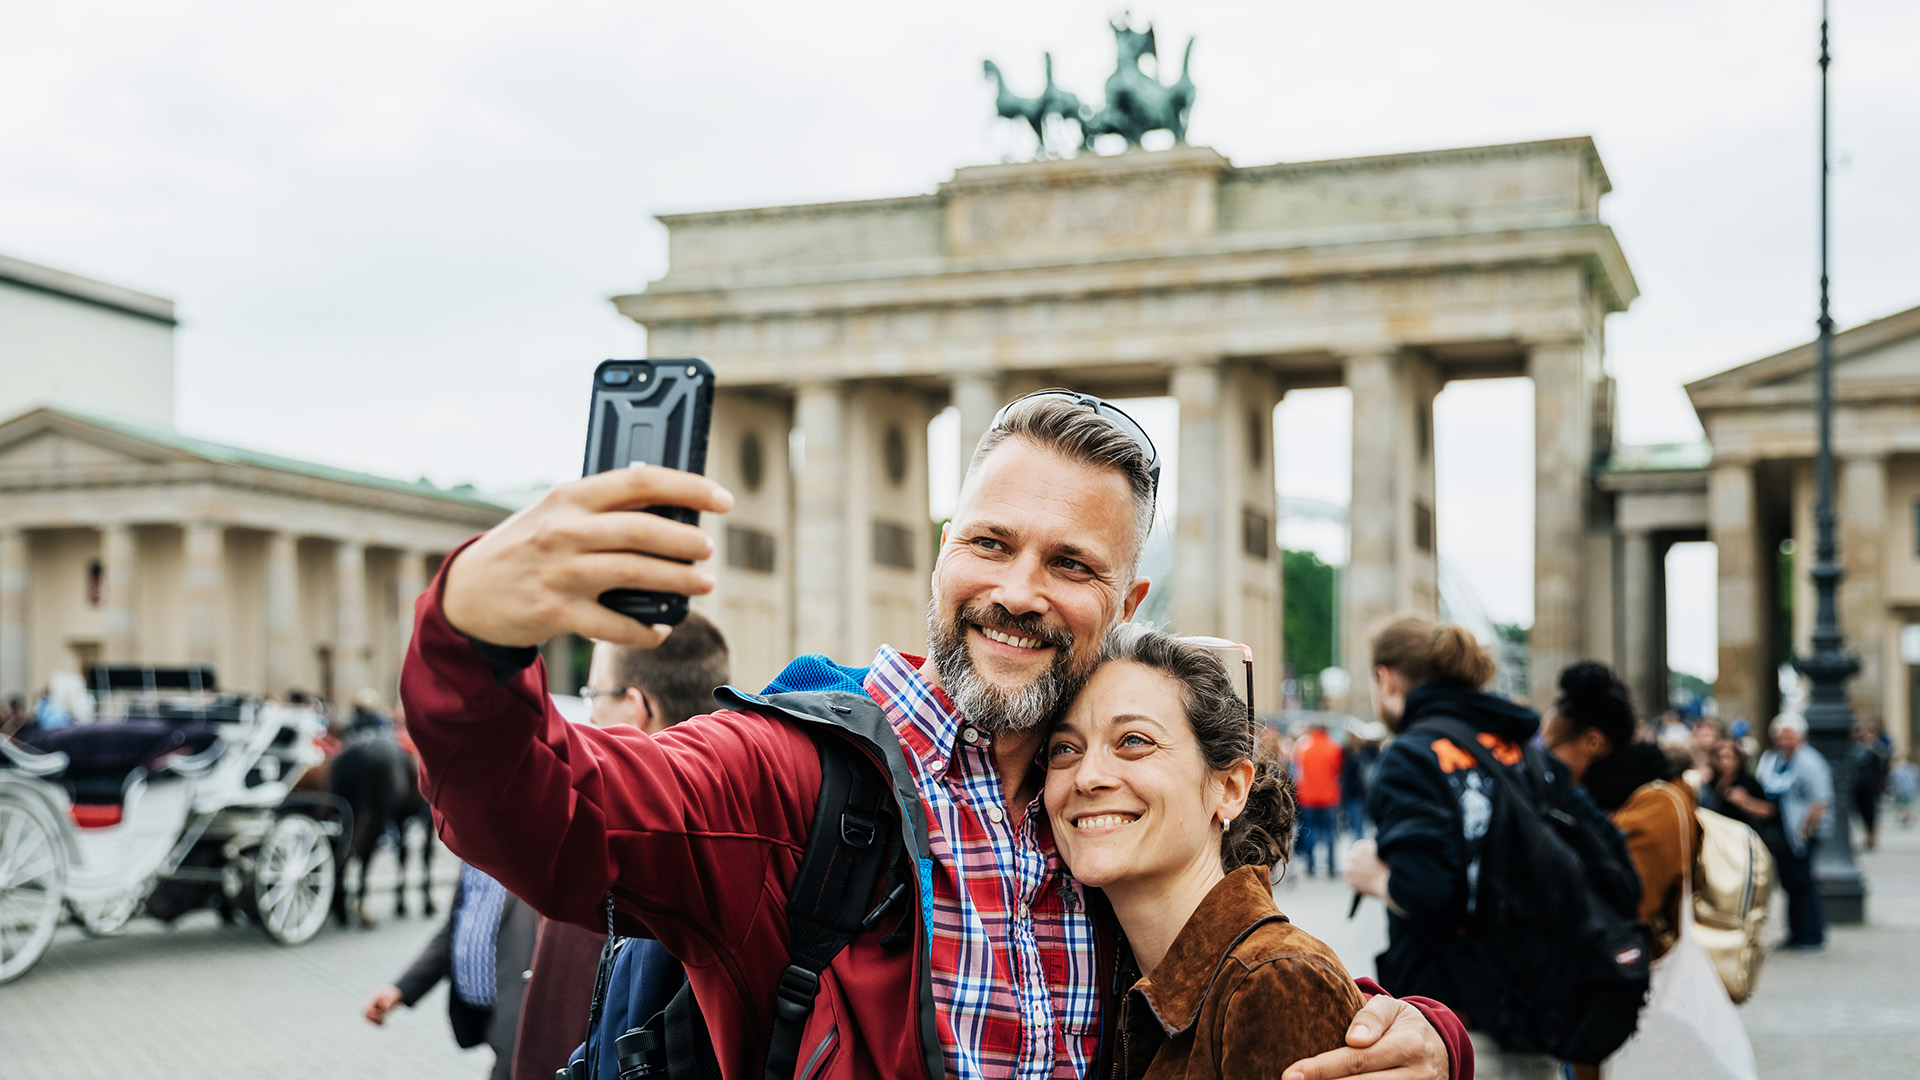 The German government helps recognize multiple citizenships and facilitate naturalization